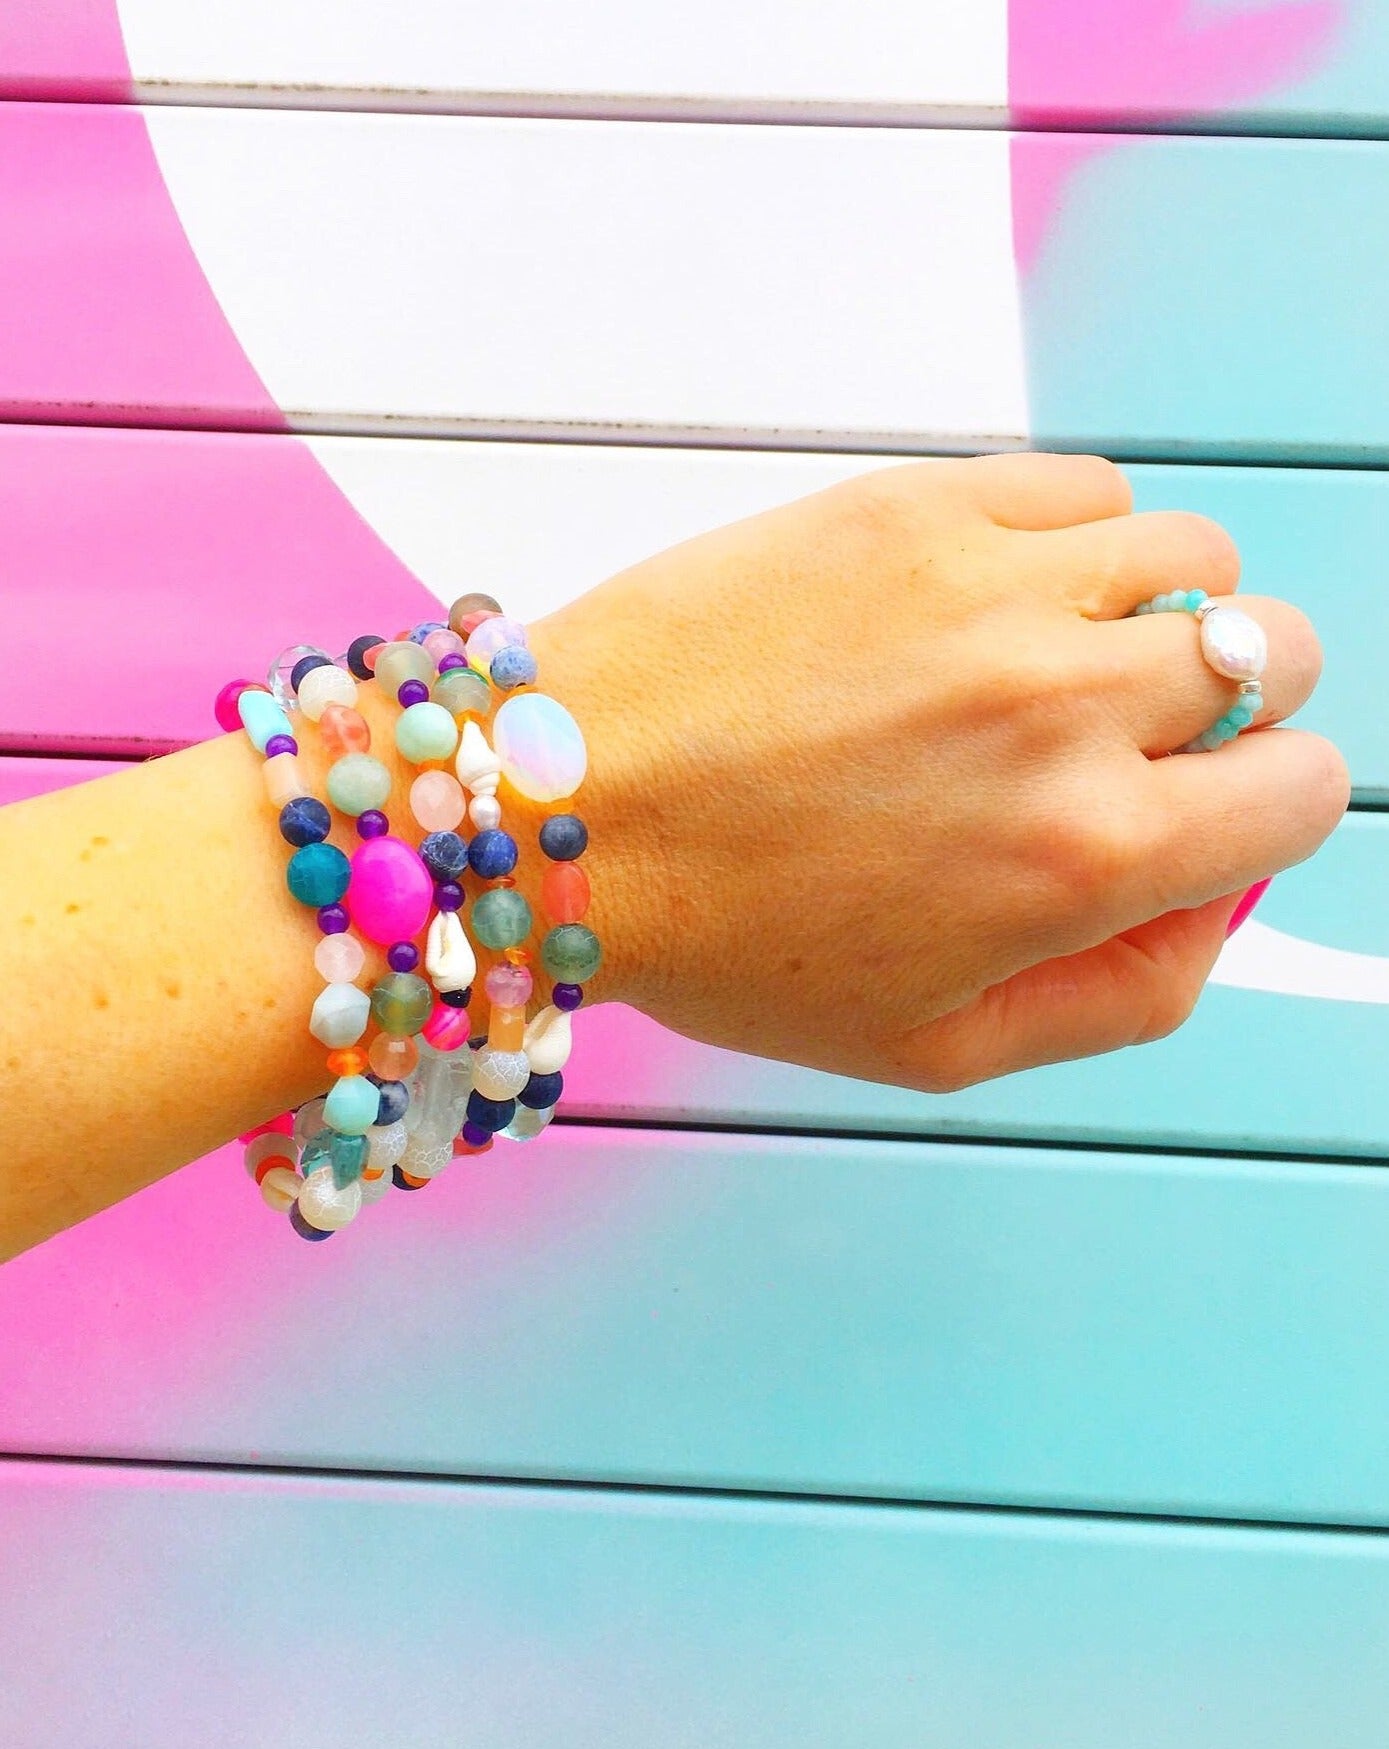 A picture of a wrist stacked with 5 treasure bracelets photographed in front of a teal and pink mural. The treasure bracelets are bright mulitcolor semiprecious beads with freshwater pearl and a beach shell on a stretchy bracelet